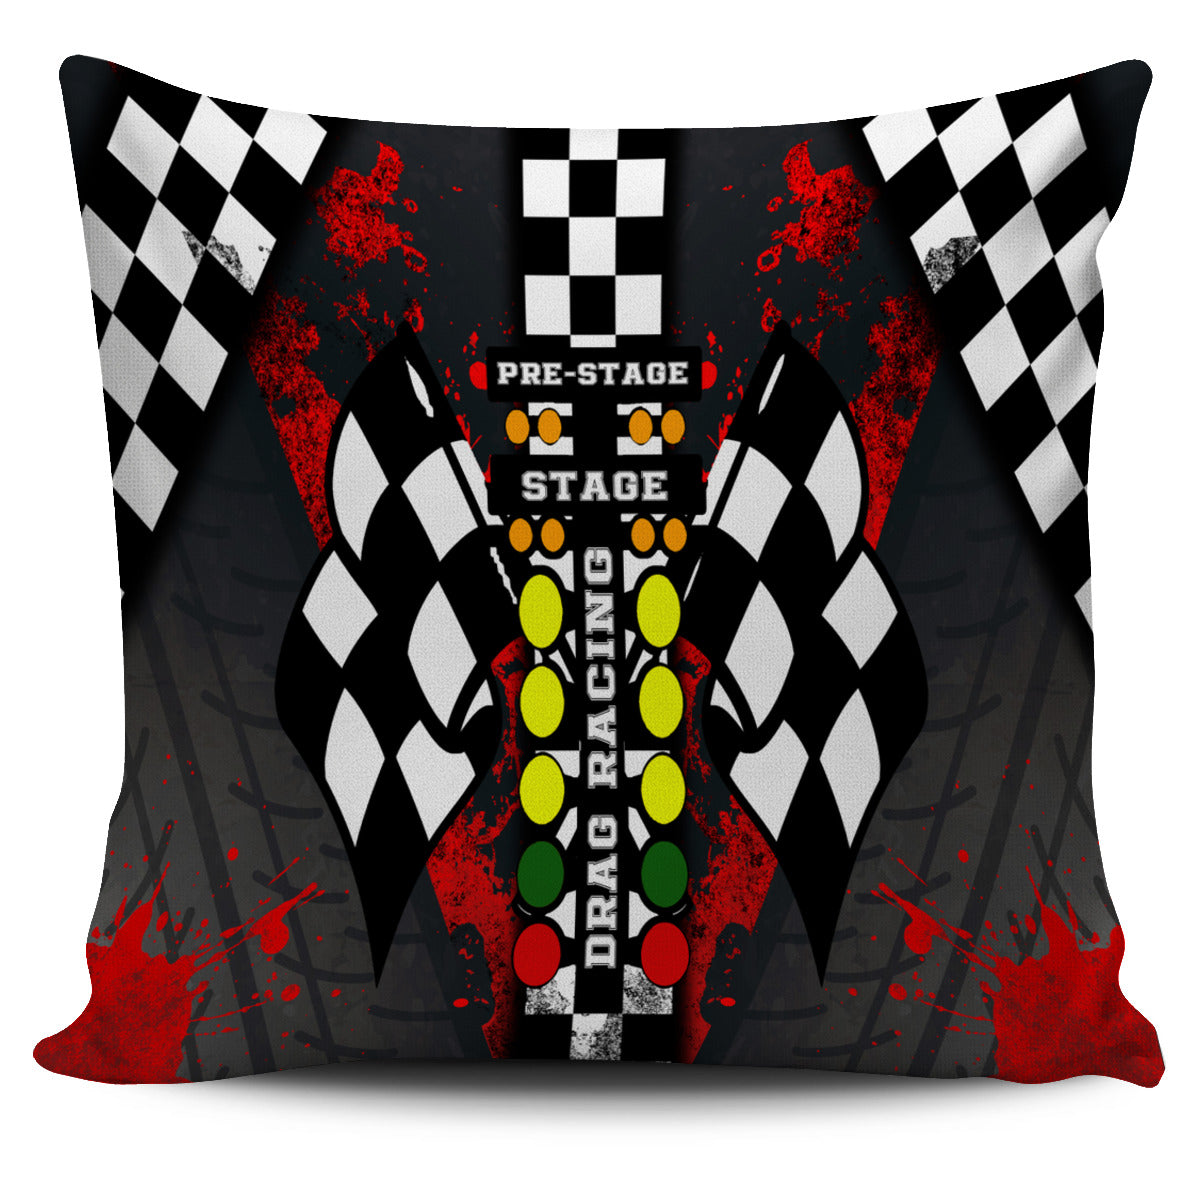 Drag Racing Pillow Covers Red